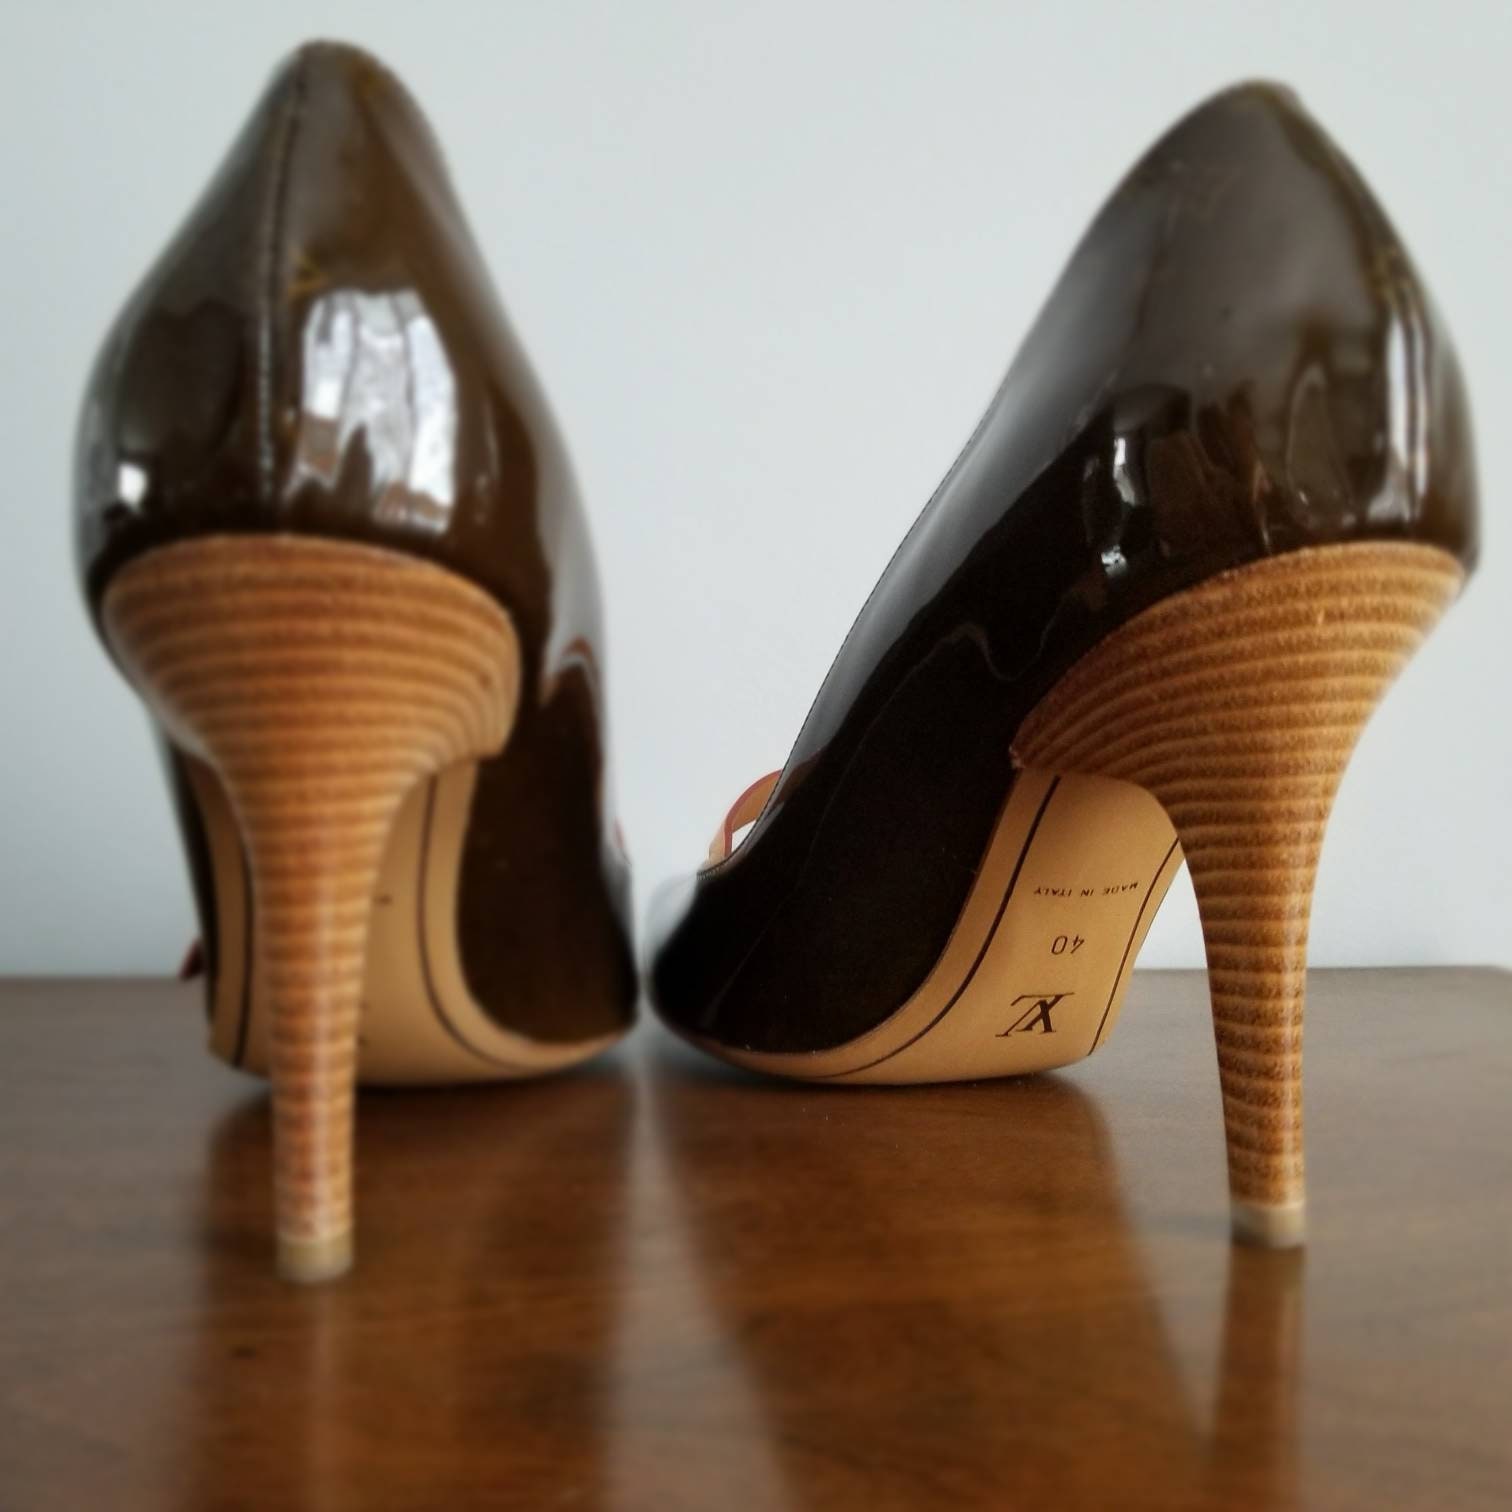 Louis Vuitton pre-owned Monogram Panel high-heeled Pumps - Farfetch